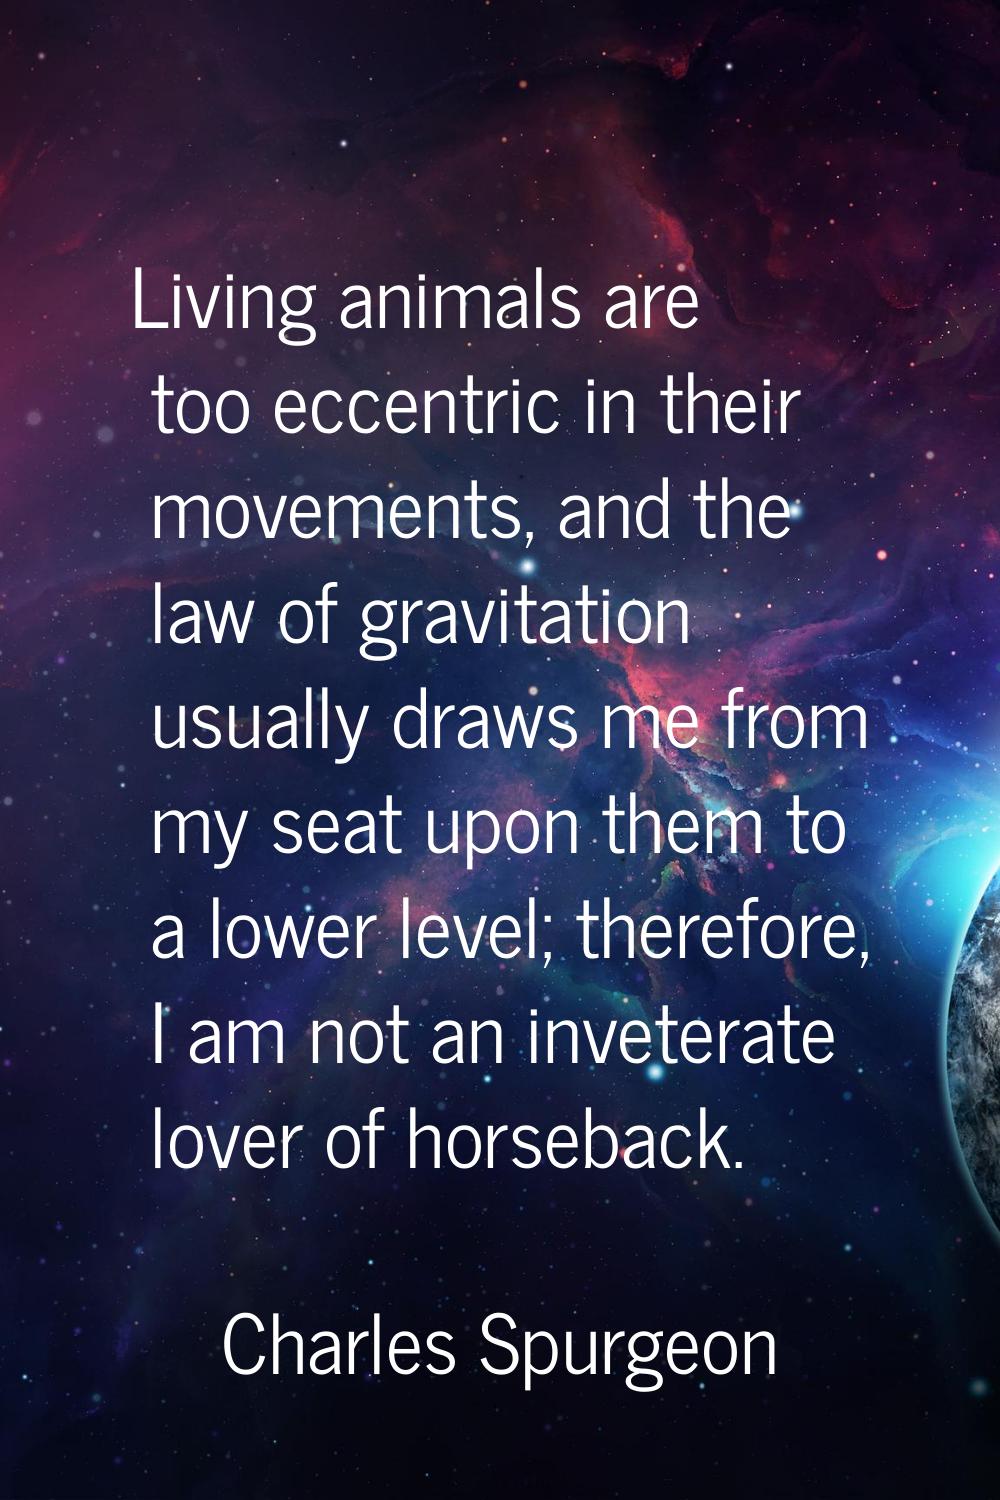 Living animals are too eccentric in their movements, and the law of gravitation usually draws me fr